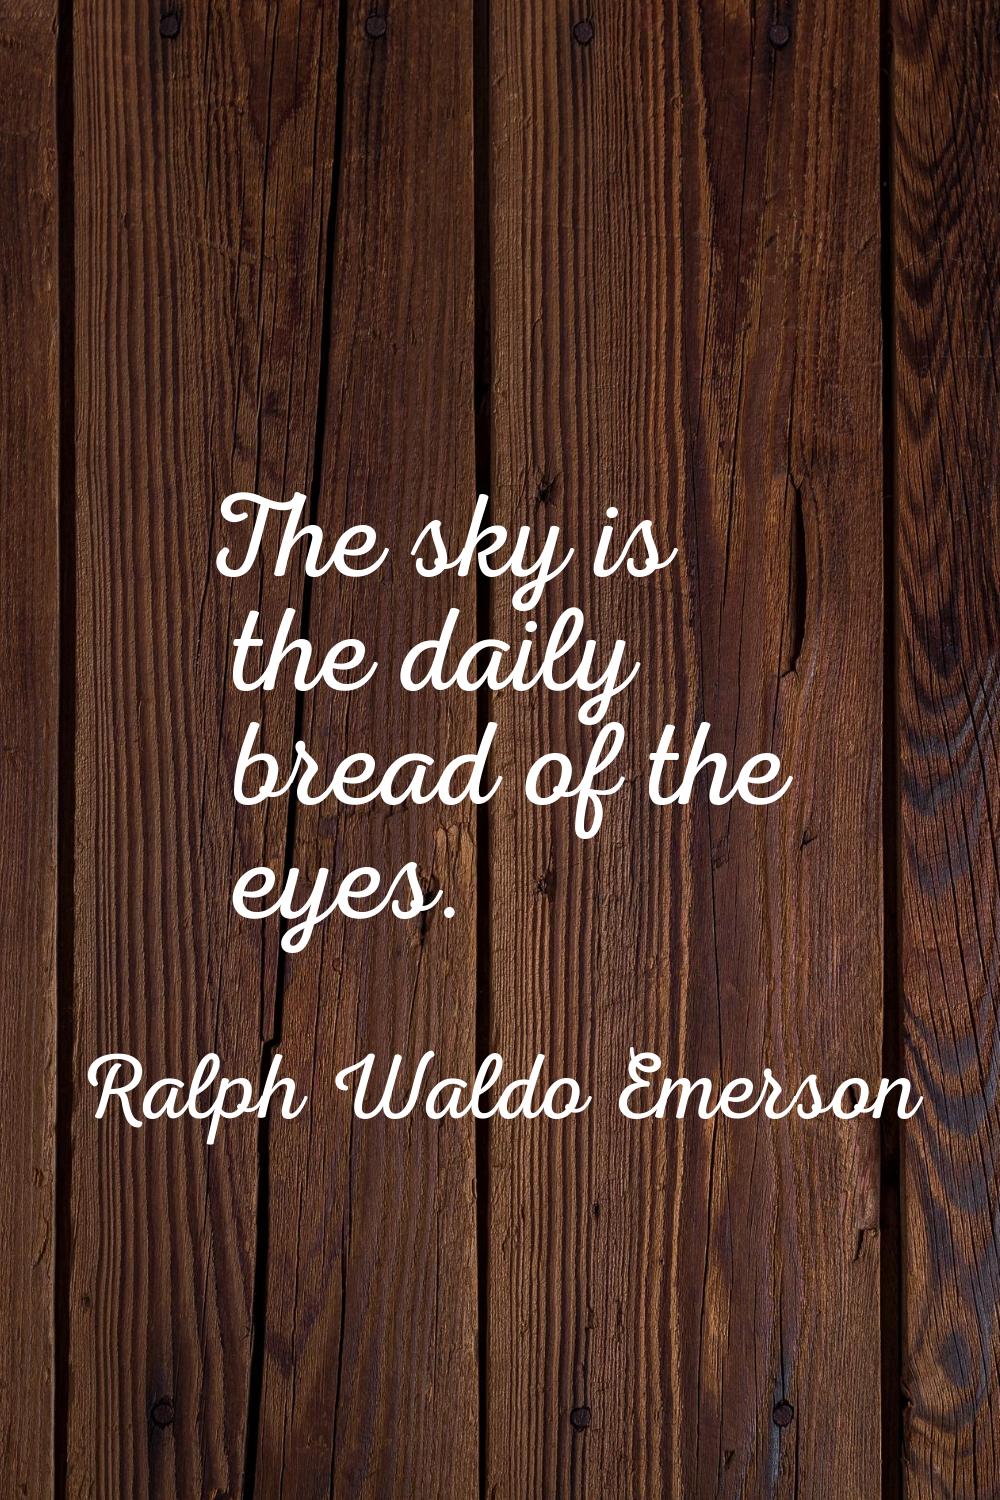 The sky is the daily bread of the eyes.